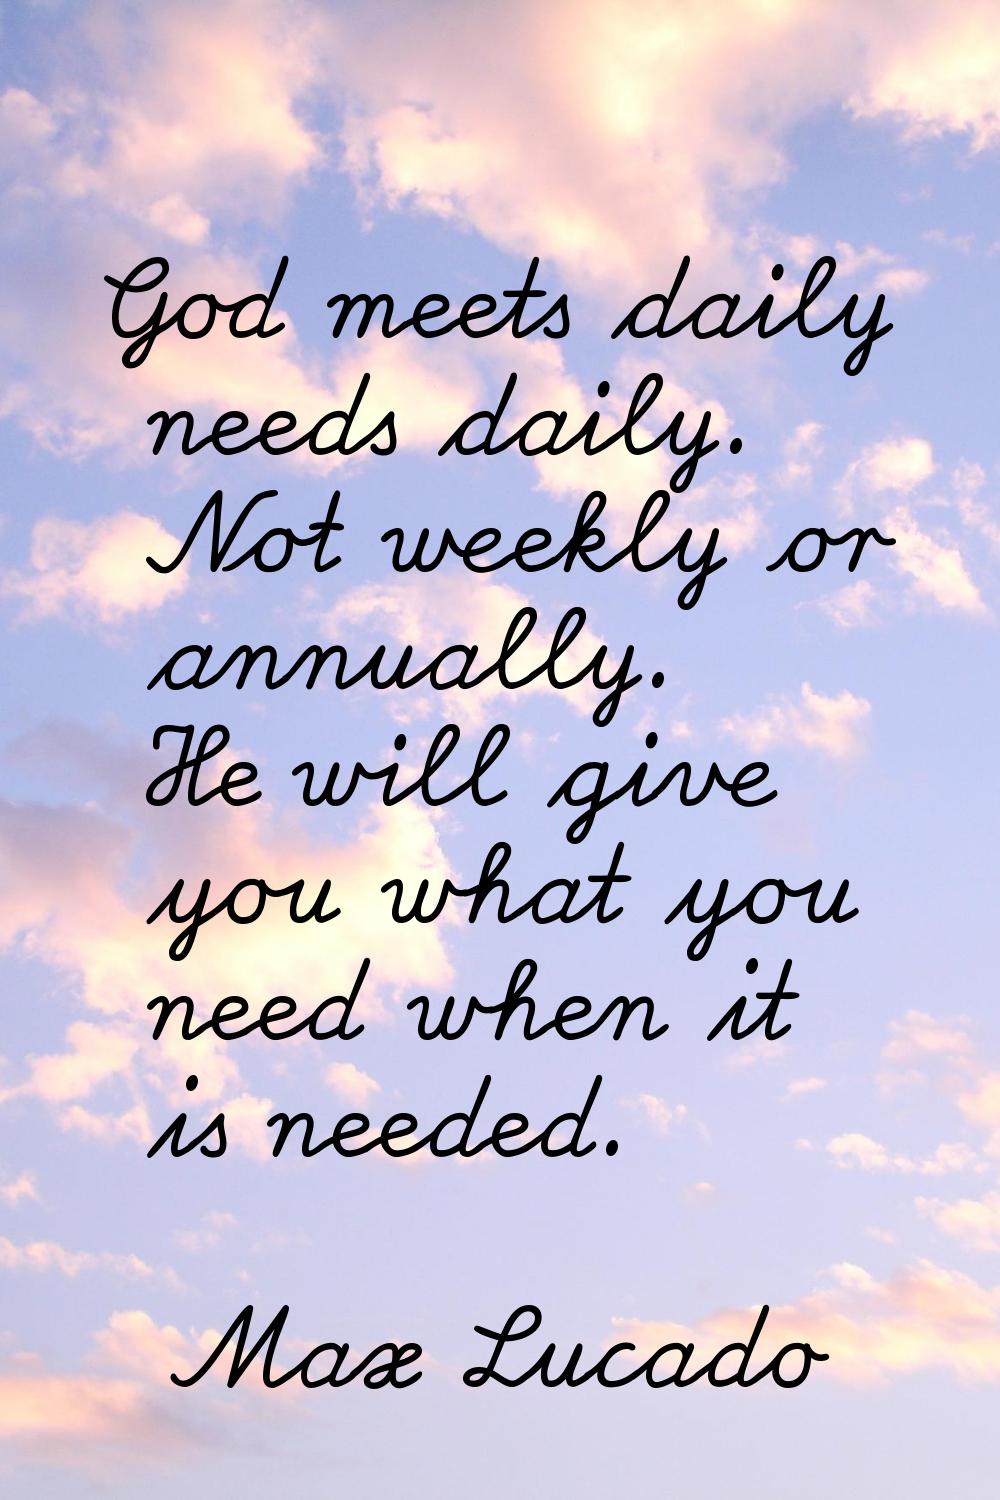 God meets daily needs daily. Not weekly or annually. He will give you what you need when it is need